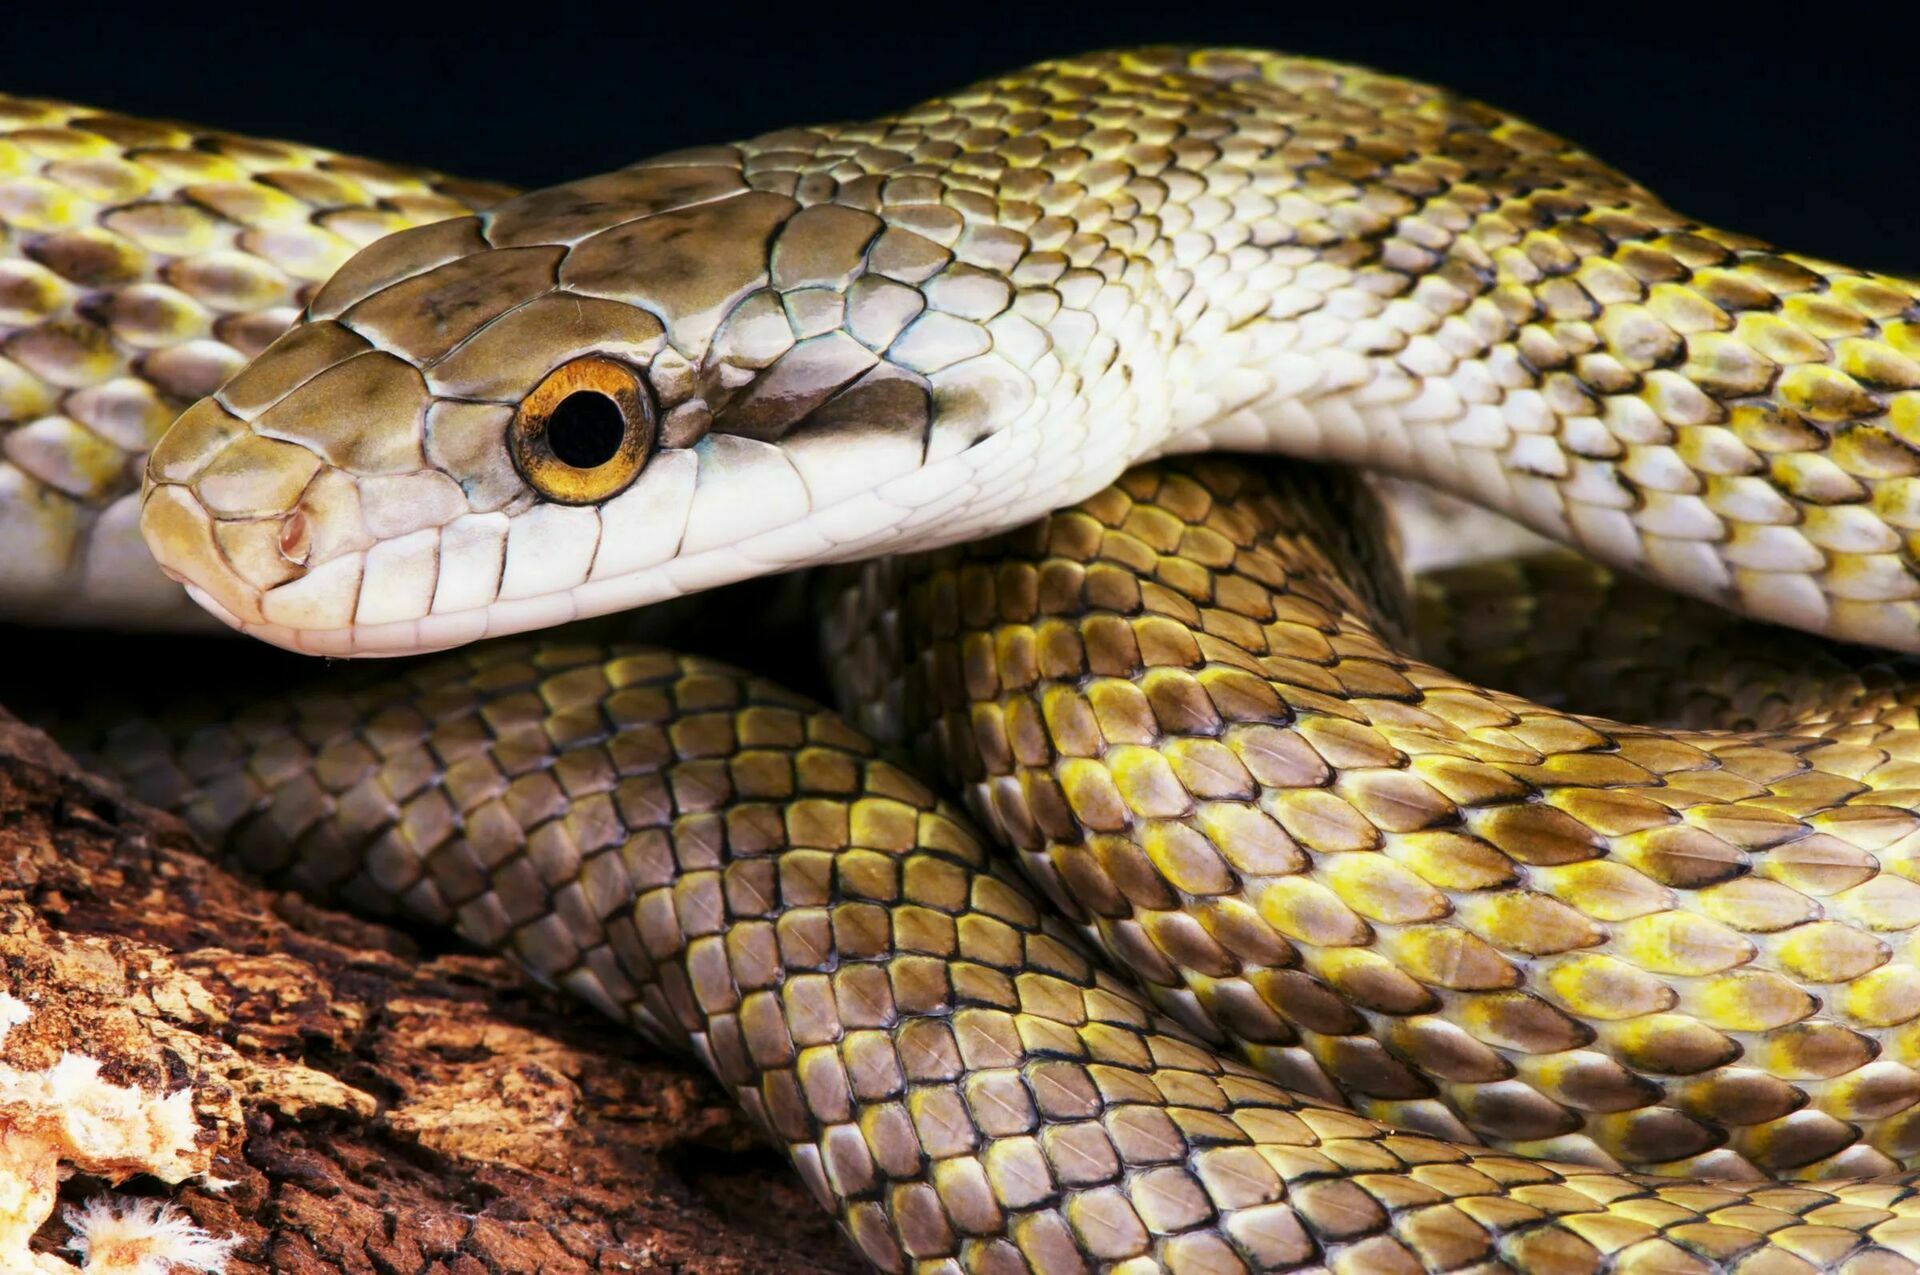 Radiation levels in Fukushima are monitored with snakes